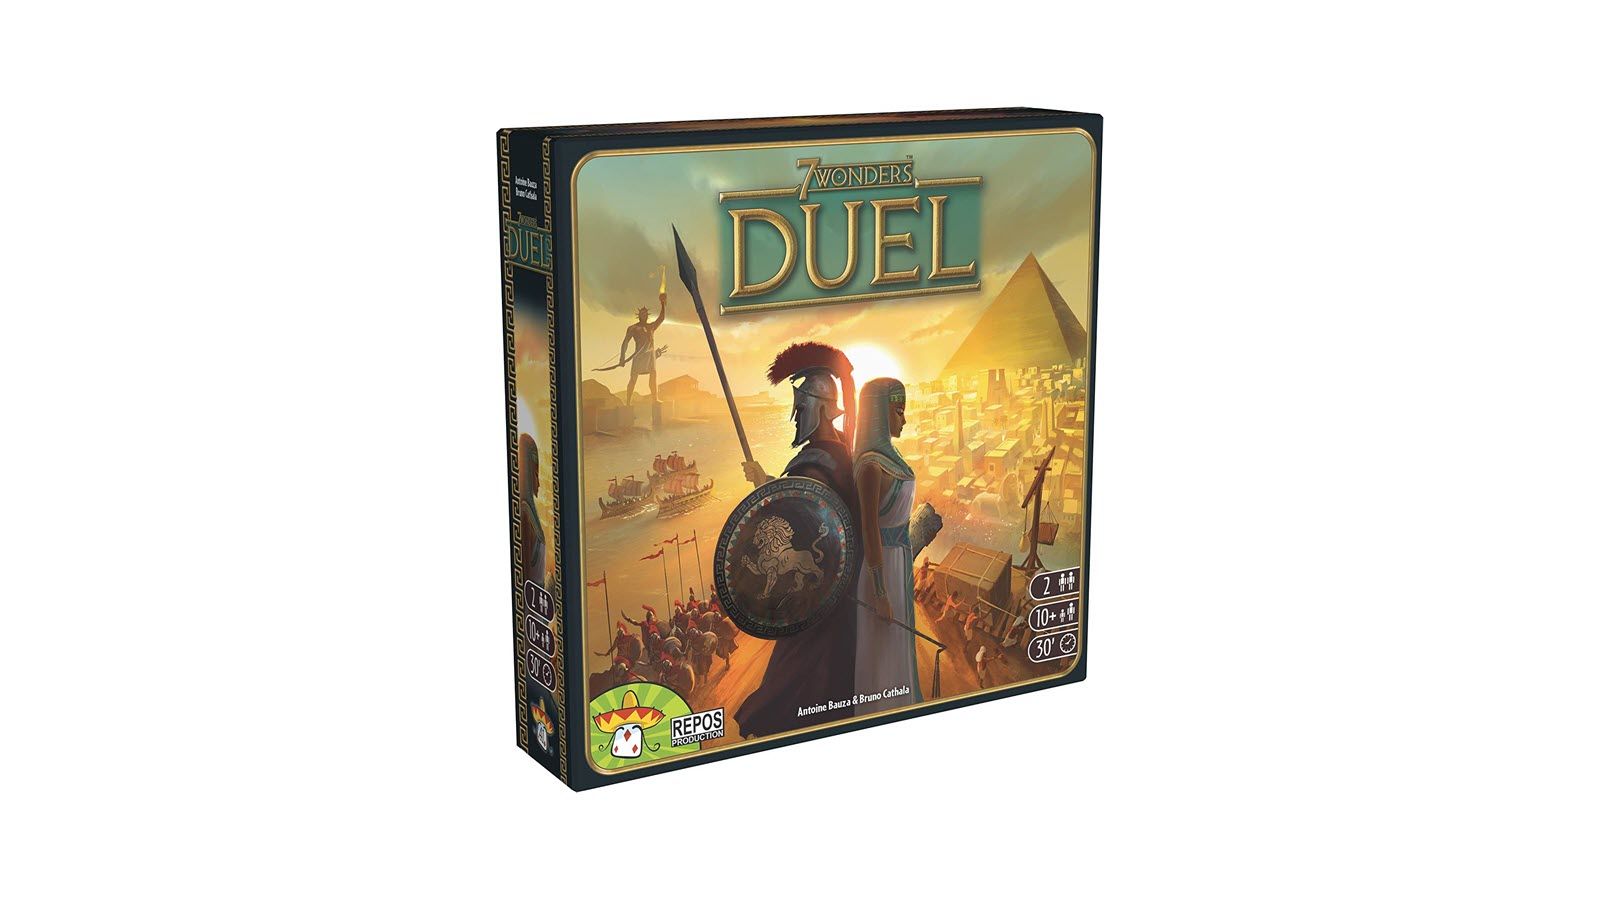 The 7 Wonders: Duel box, featuring a man and woman standing back-to-back.